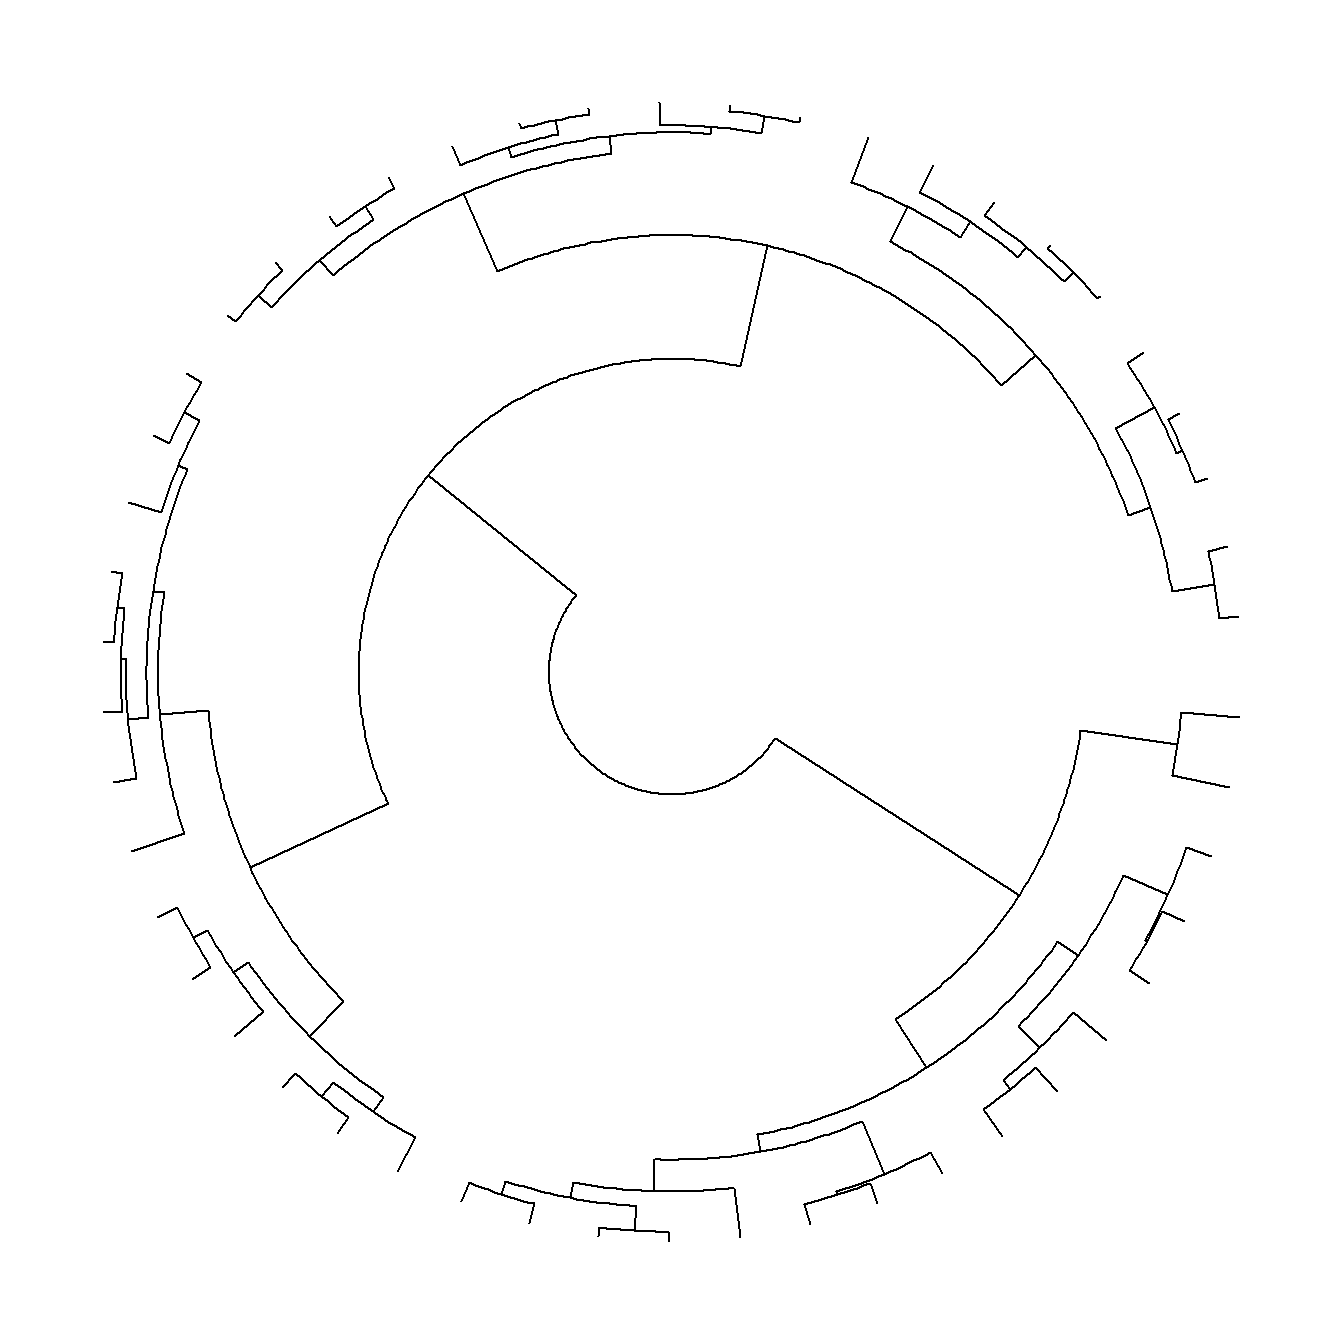 Radial tree plot in R without labels